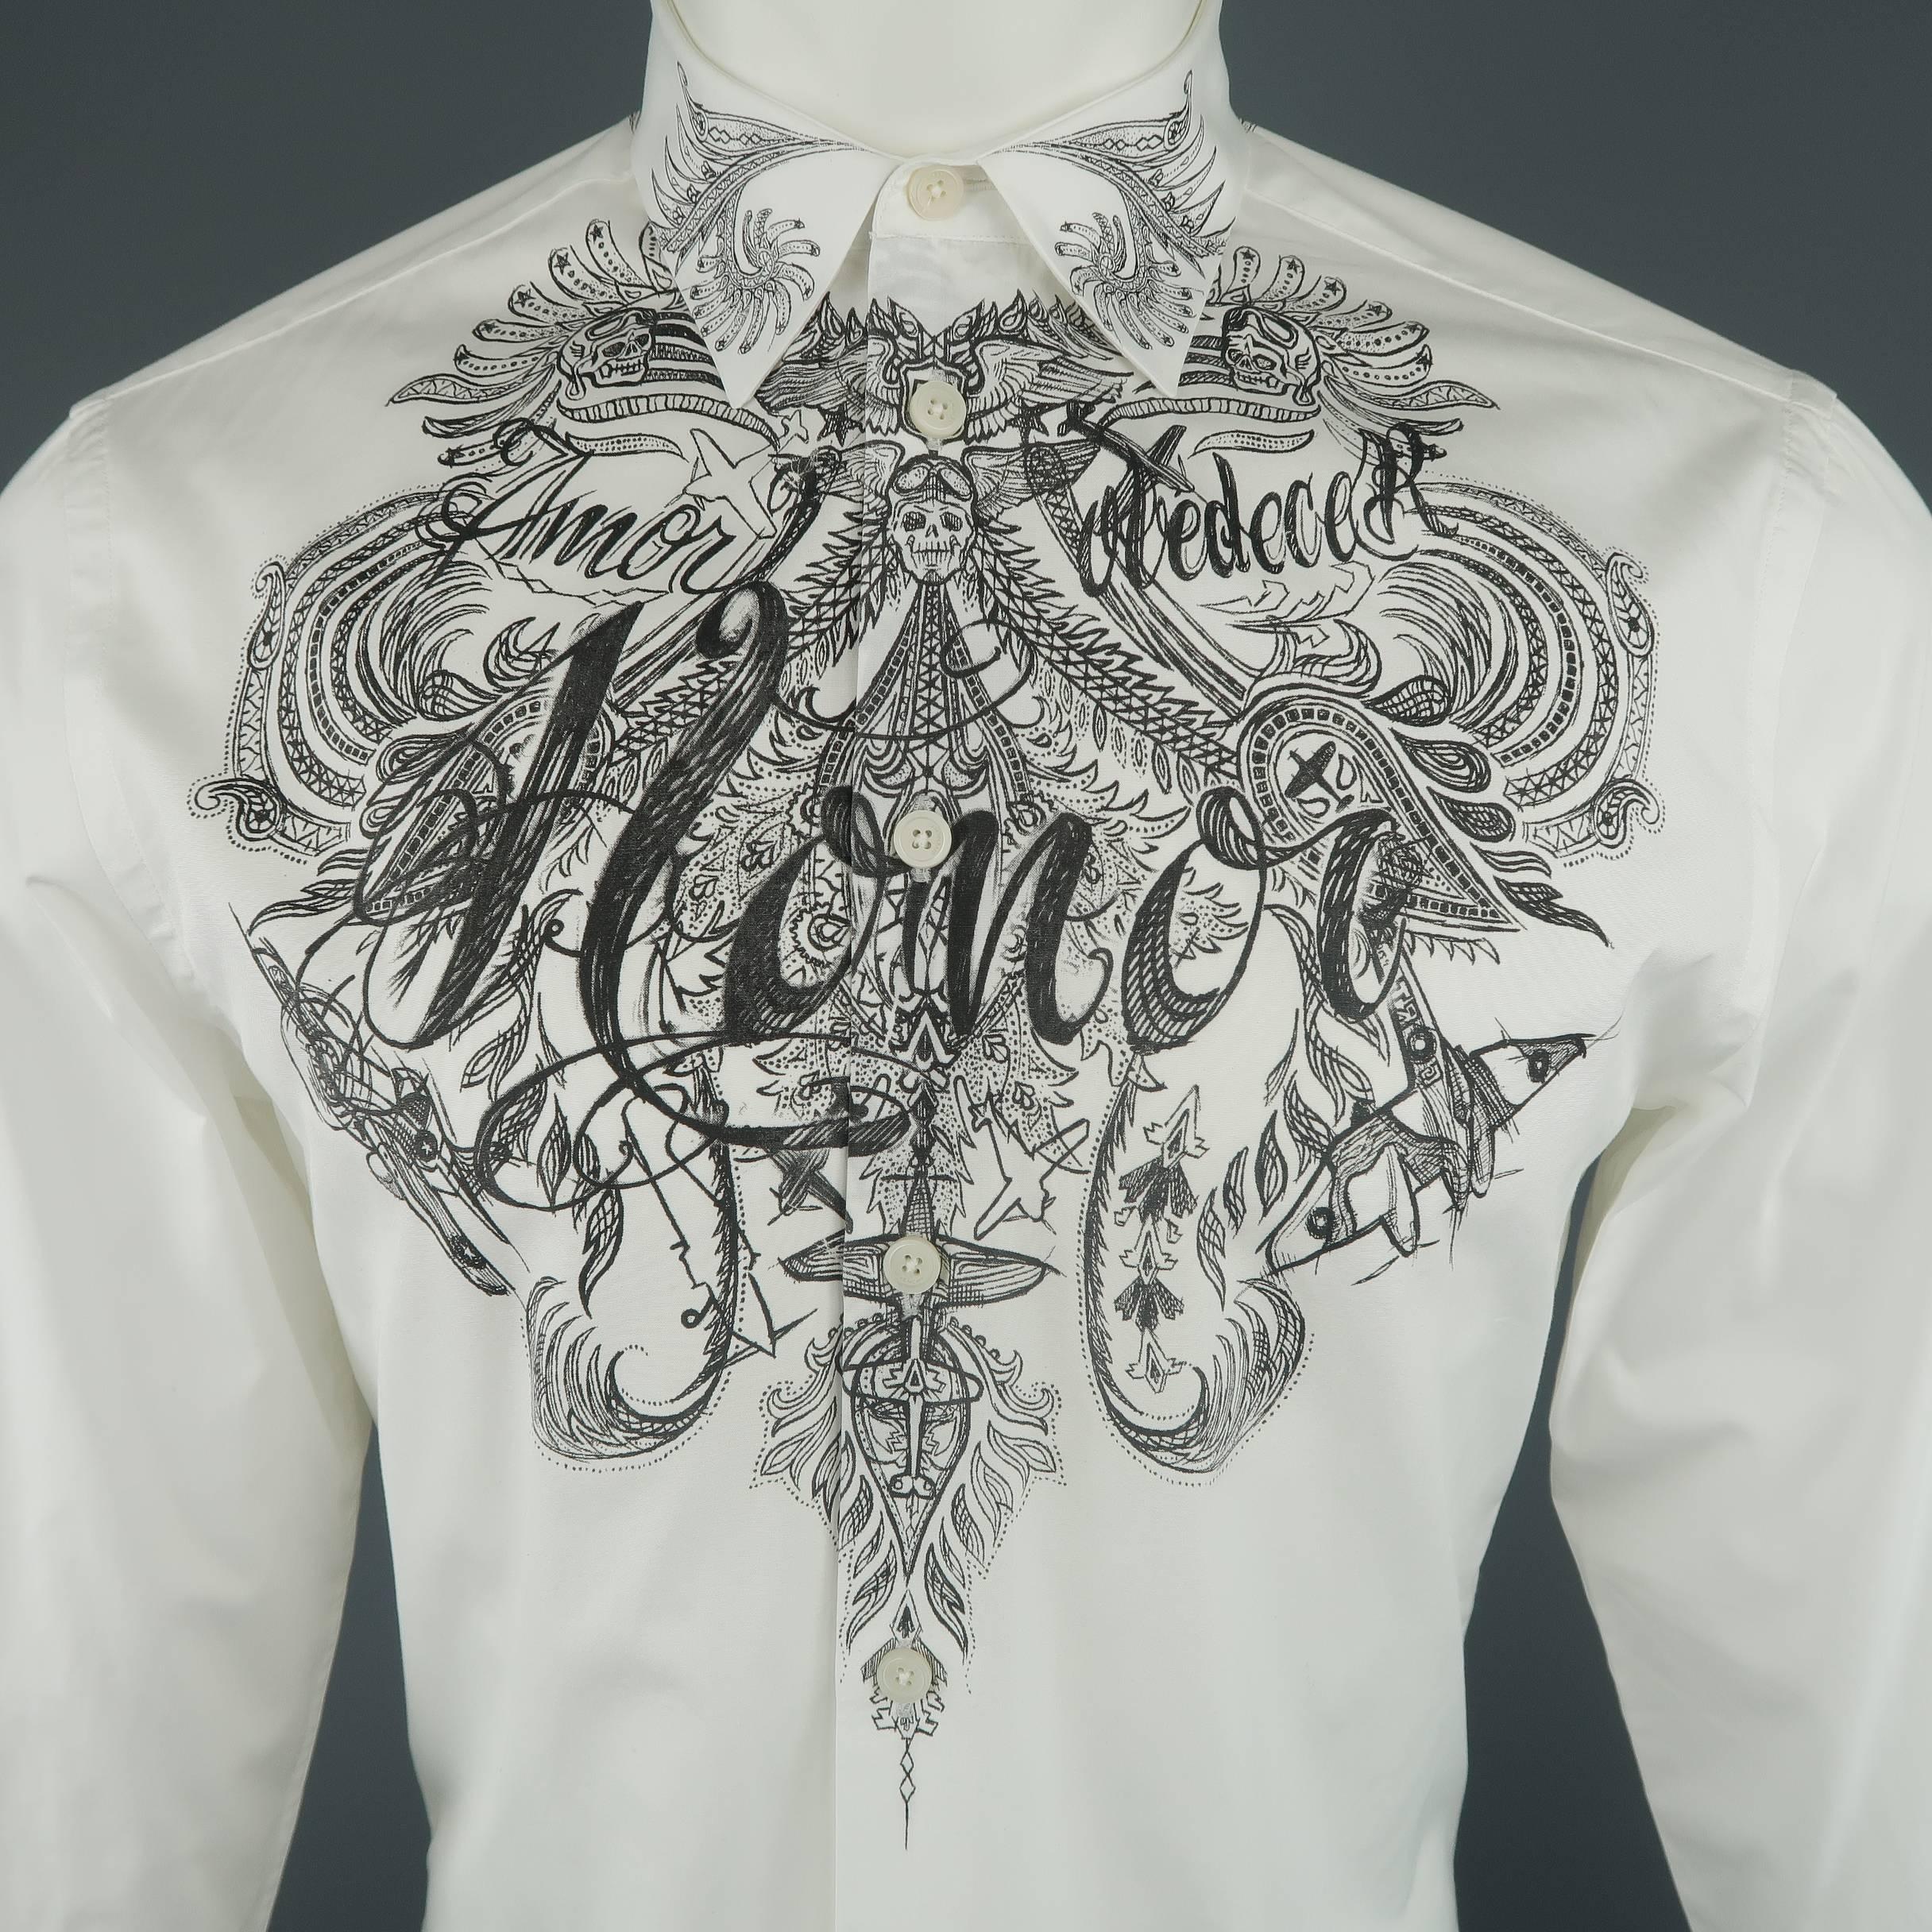 GIVENCHY by RICCARDO TISCI dress shirt comes in classic white cotton with a pointed collar and 